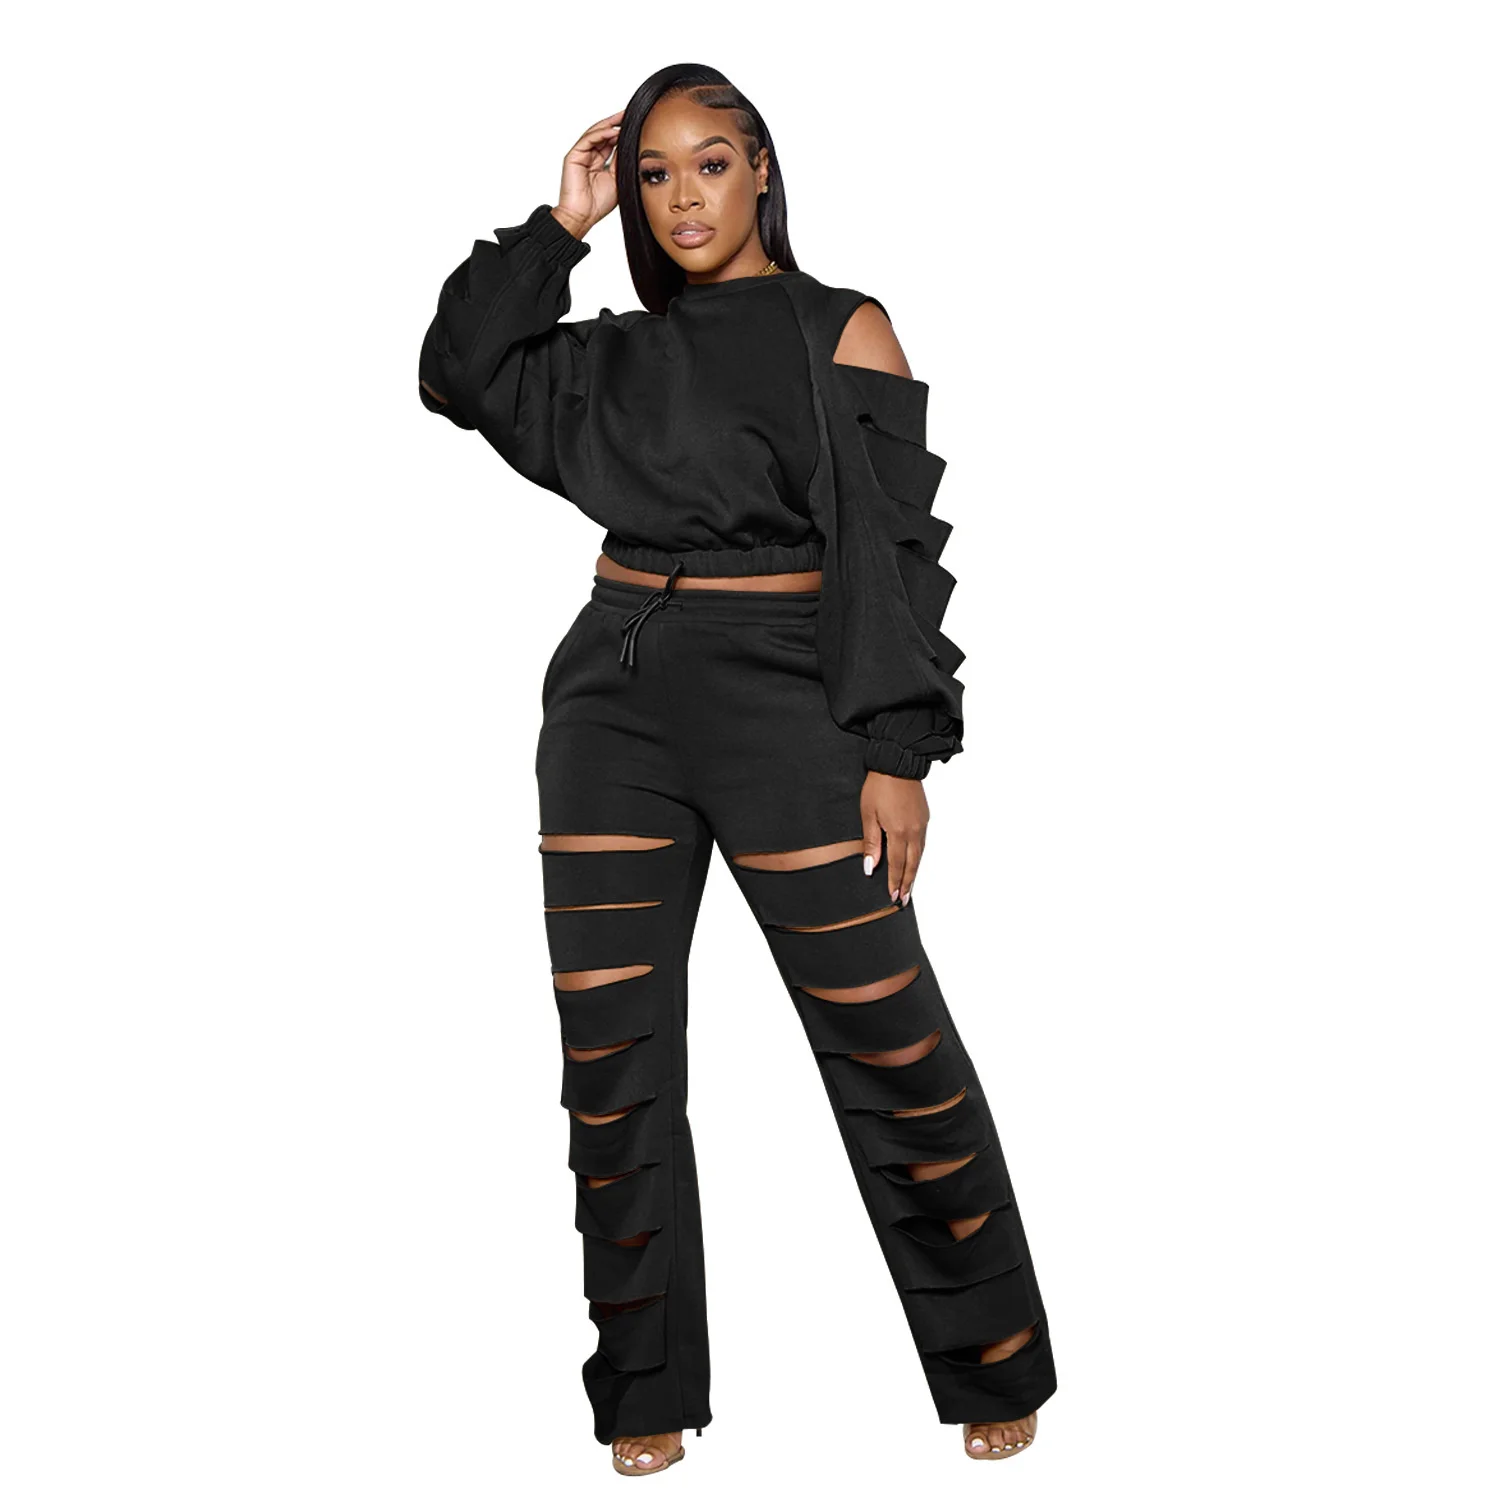 

Zoctuo Fashion Outfits Lady Female Clothing Trouser Suits Solid Lace Up Long Sleeve Tops And Pants Two 2 Piece Set Tracksuits